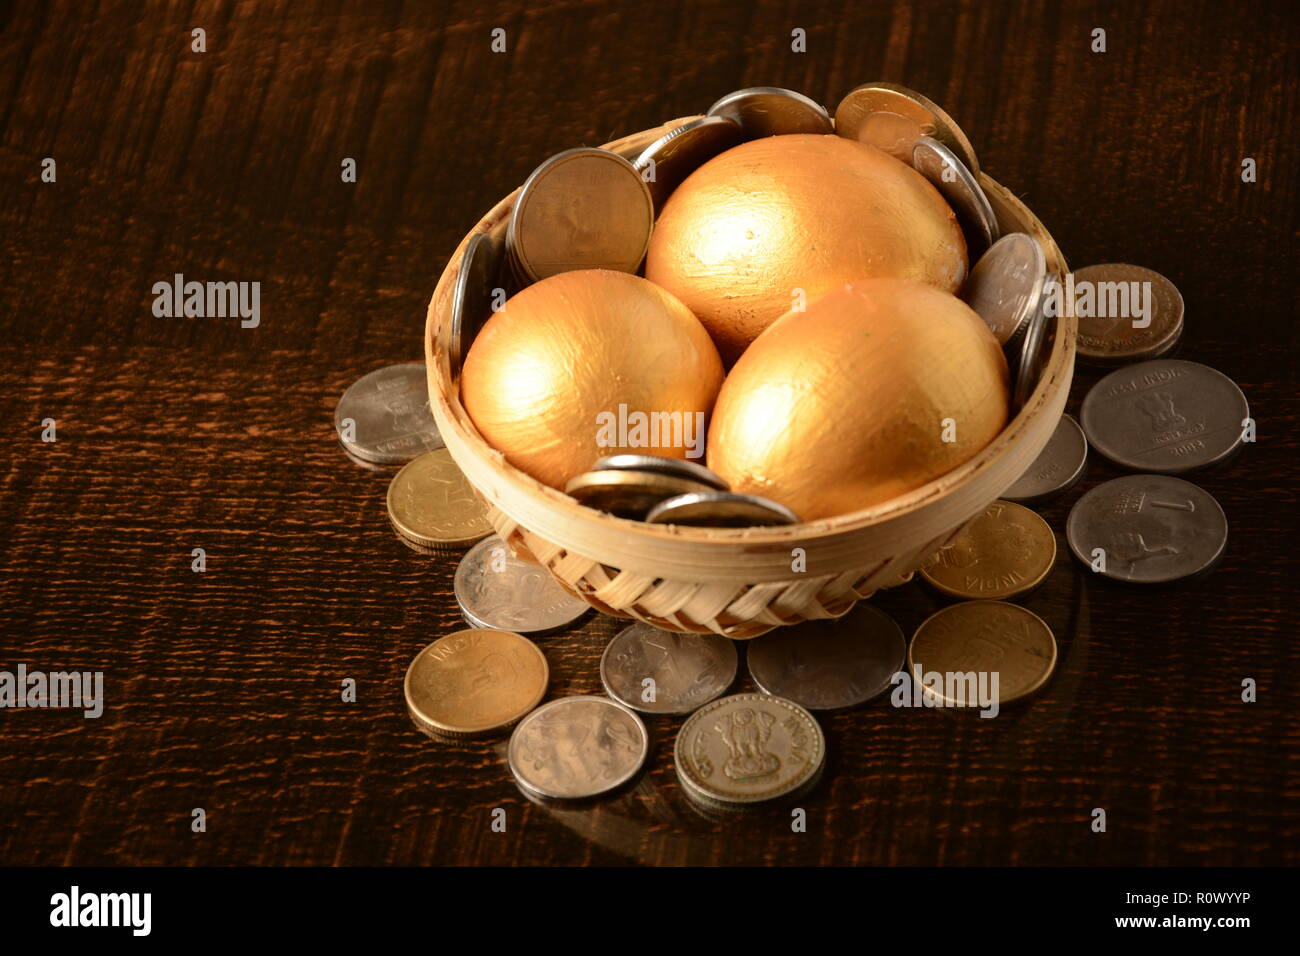 Animal Egg Aspirations Awe Banking Consumerism Egg Inspiration Opportunity Finance Gold Gold Colored Skill Wealth Achievement Background Stock Photo